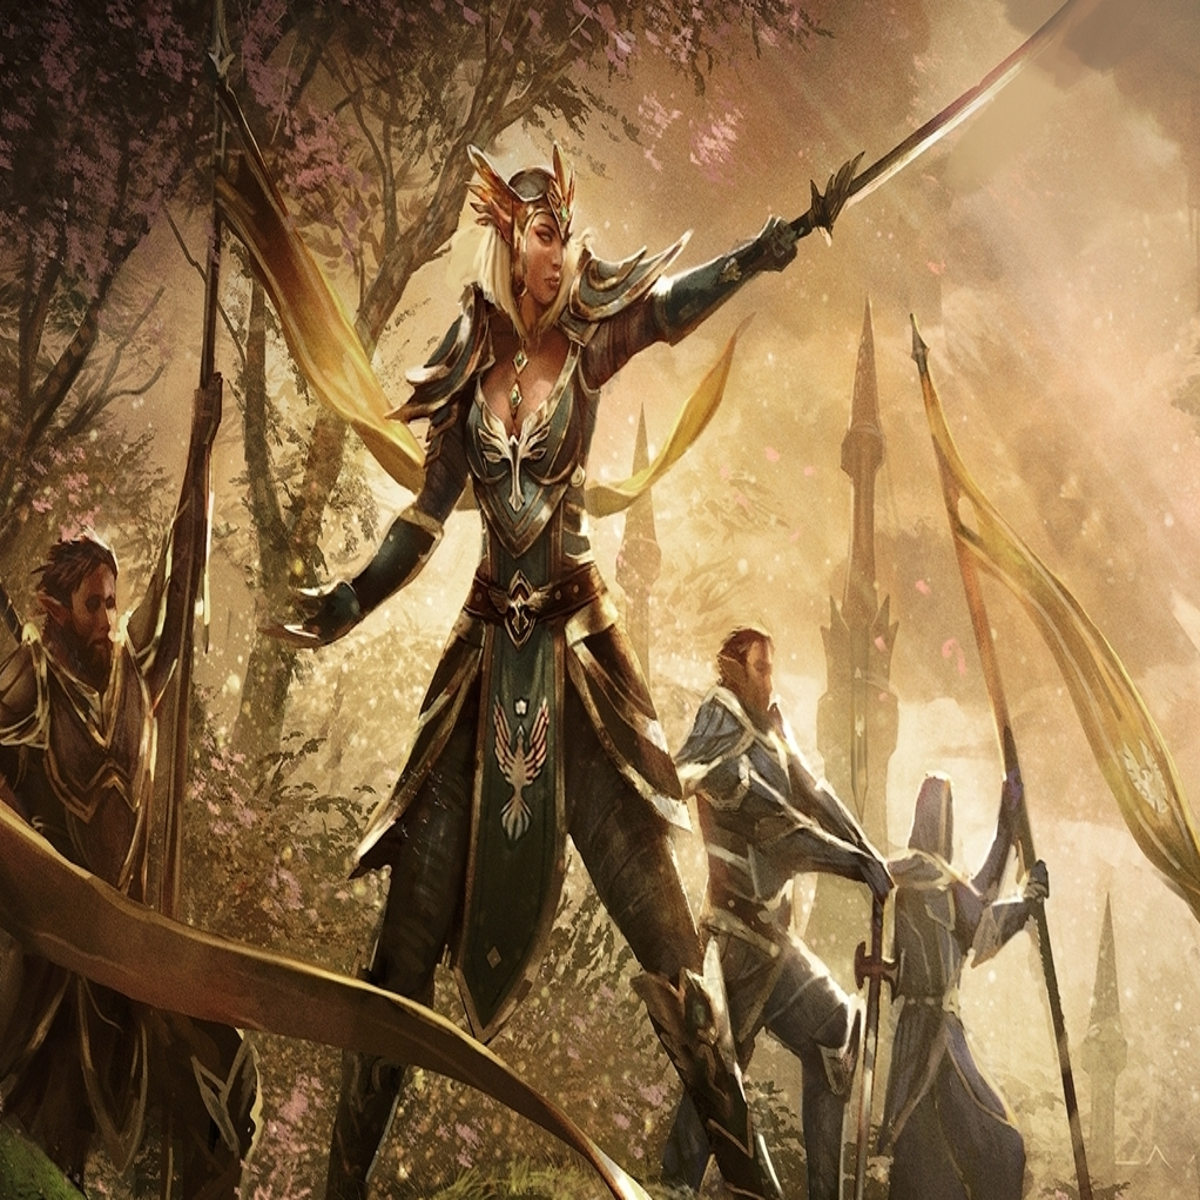 The Elder Scrolls Online Reviews, Pros and Cons